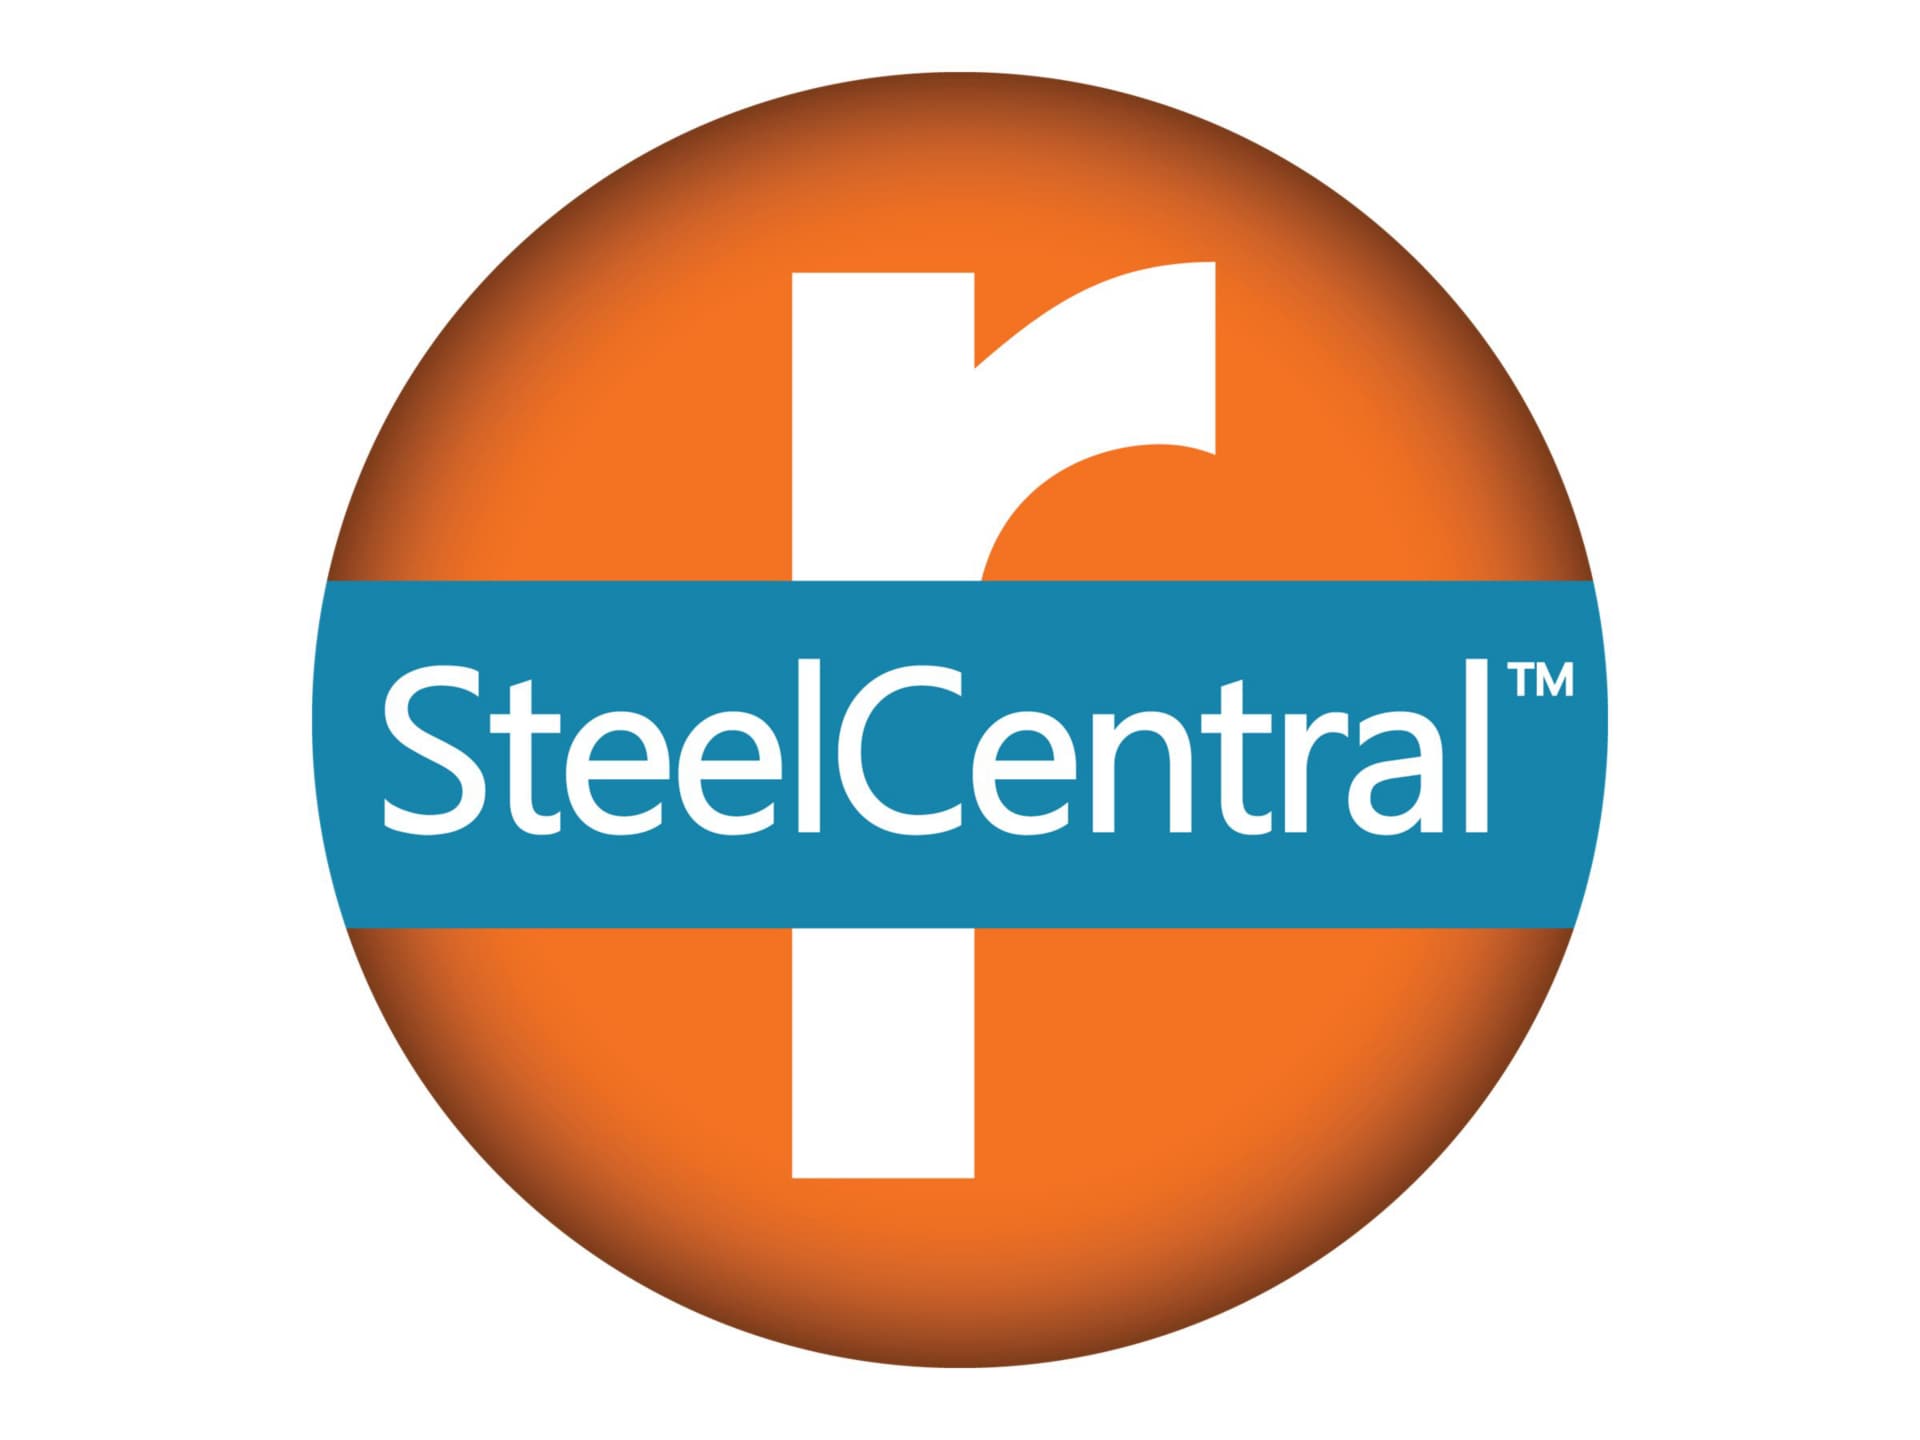 SteelCentral AppResponse Web Transaction Analysis Module - subscription lic